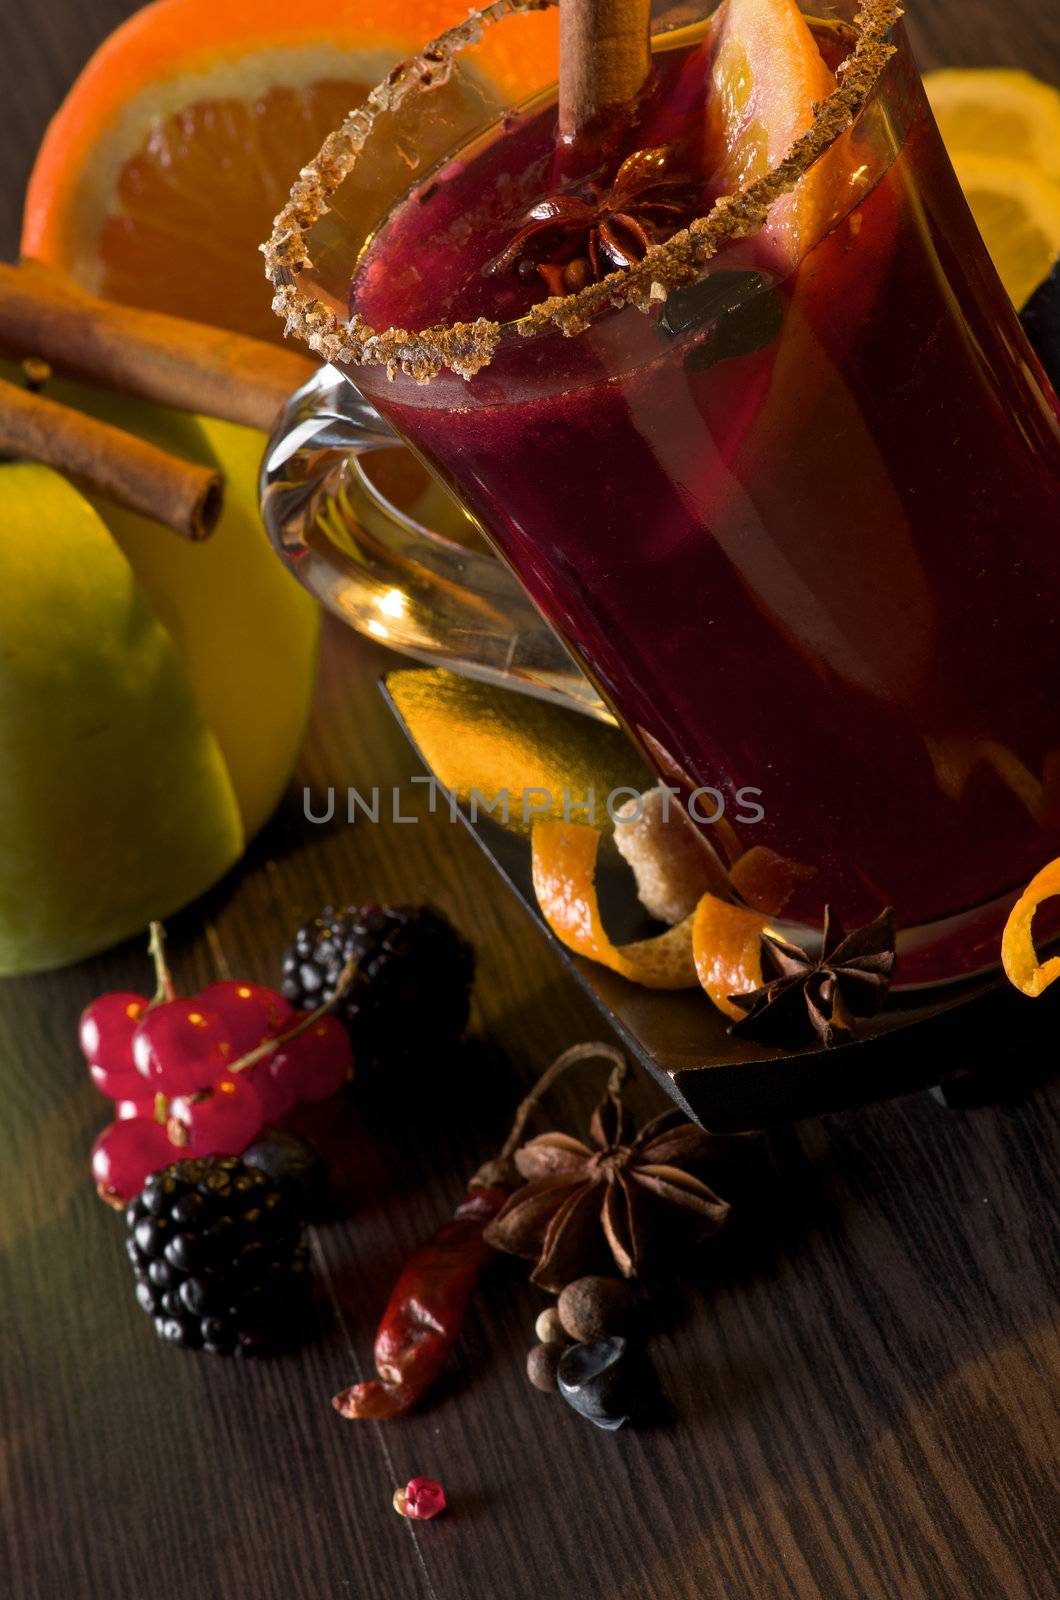 Glass of Mulled Wine with Cinnamon Stick, Slice of Orange and Anise Star closeup on Dark Wood background with Fruits and Spices  